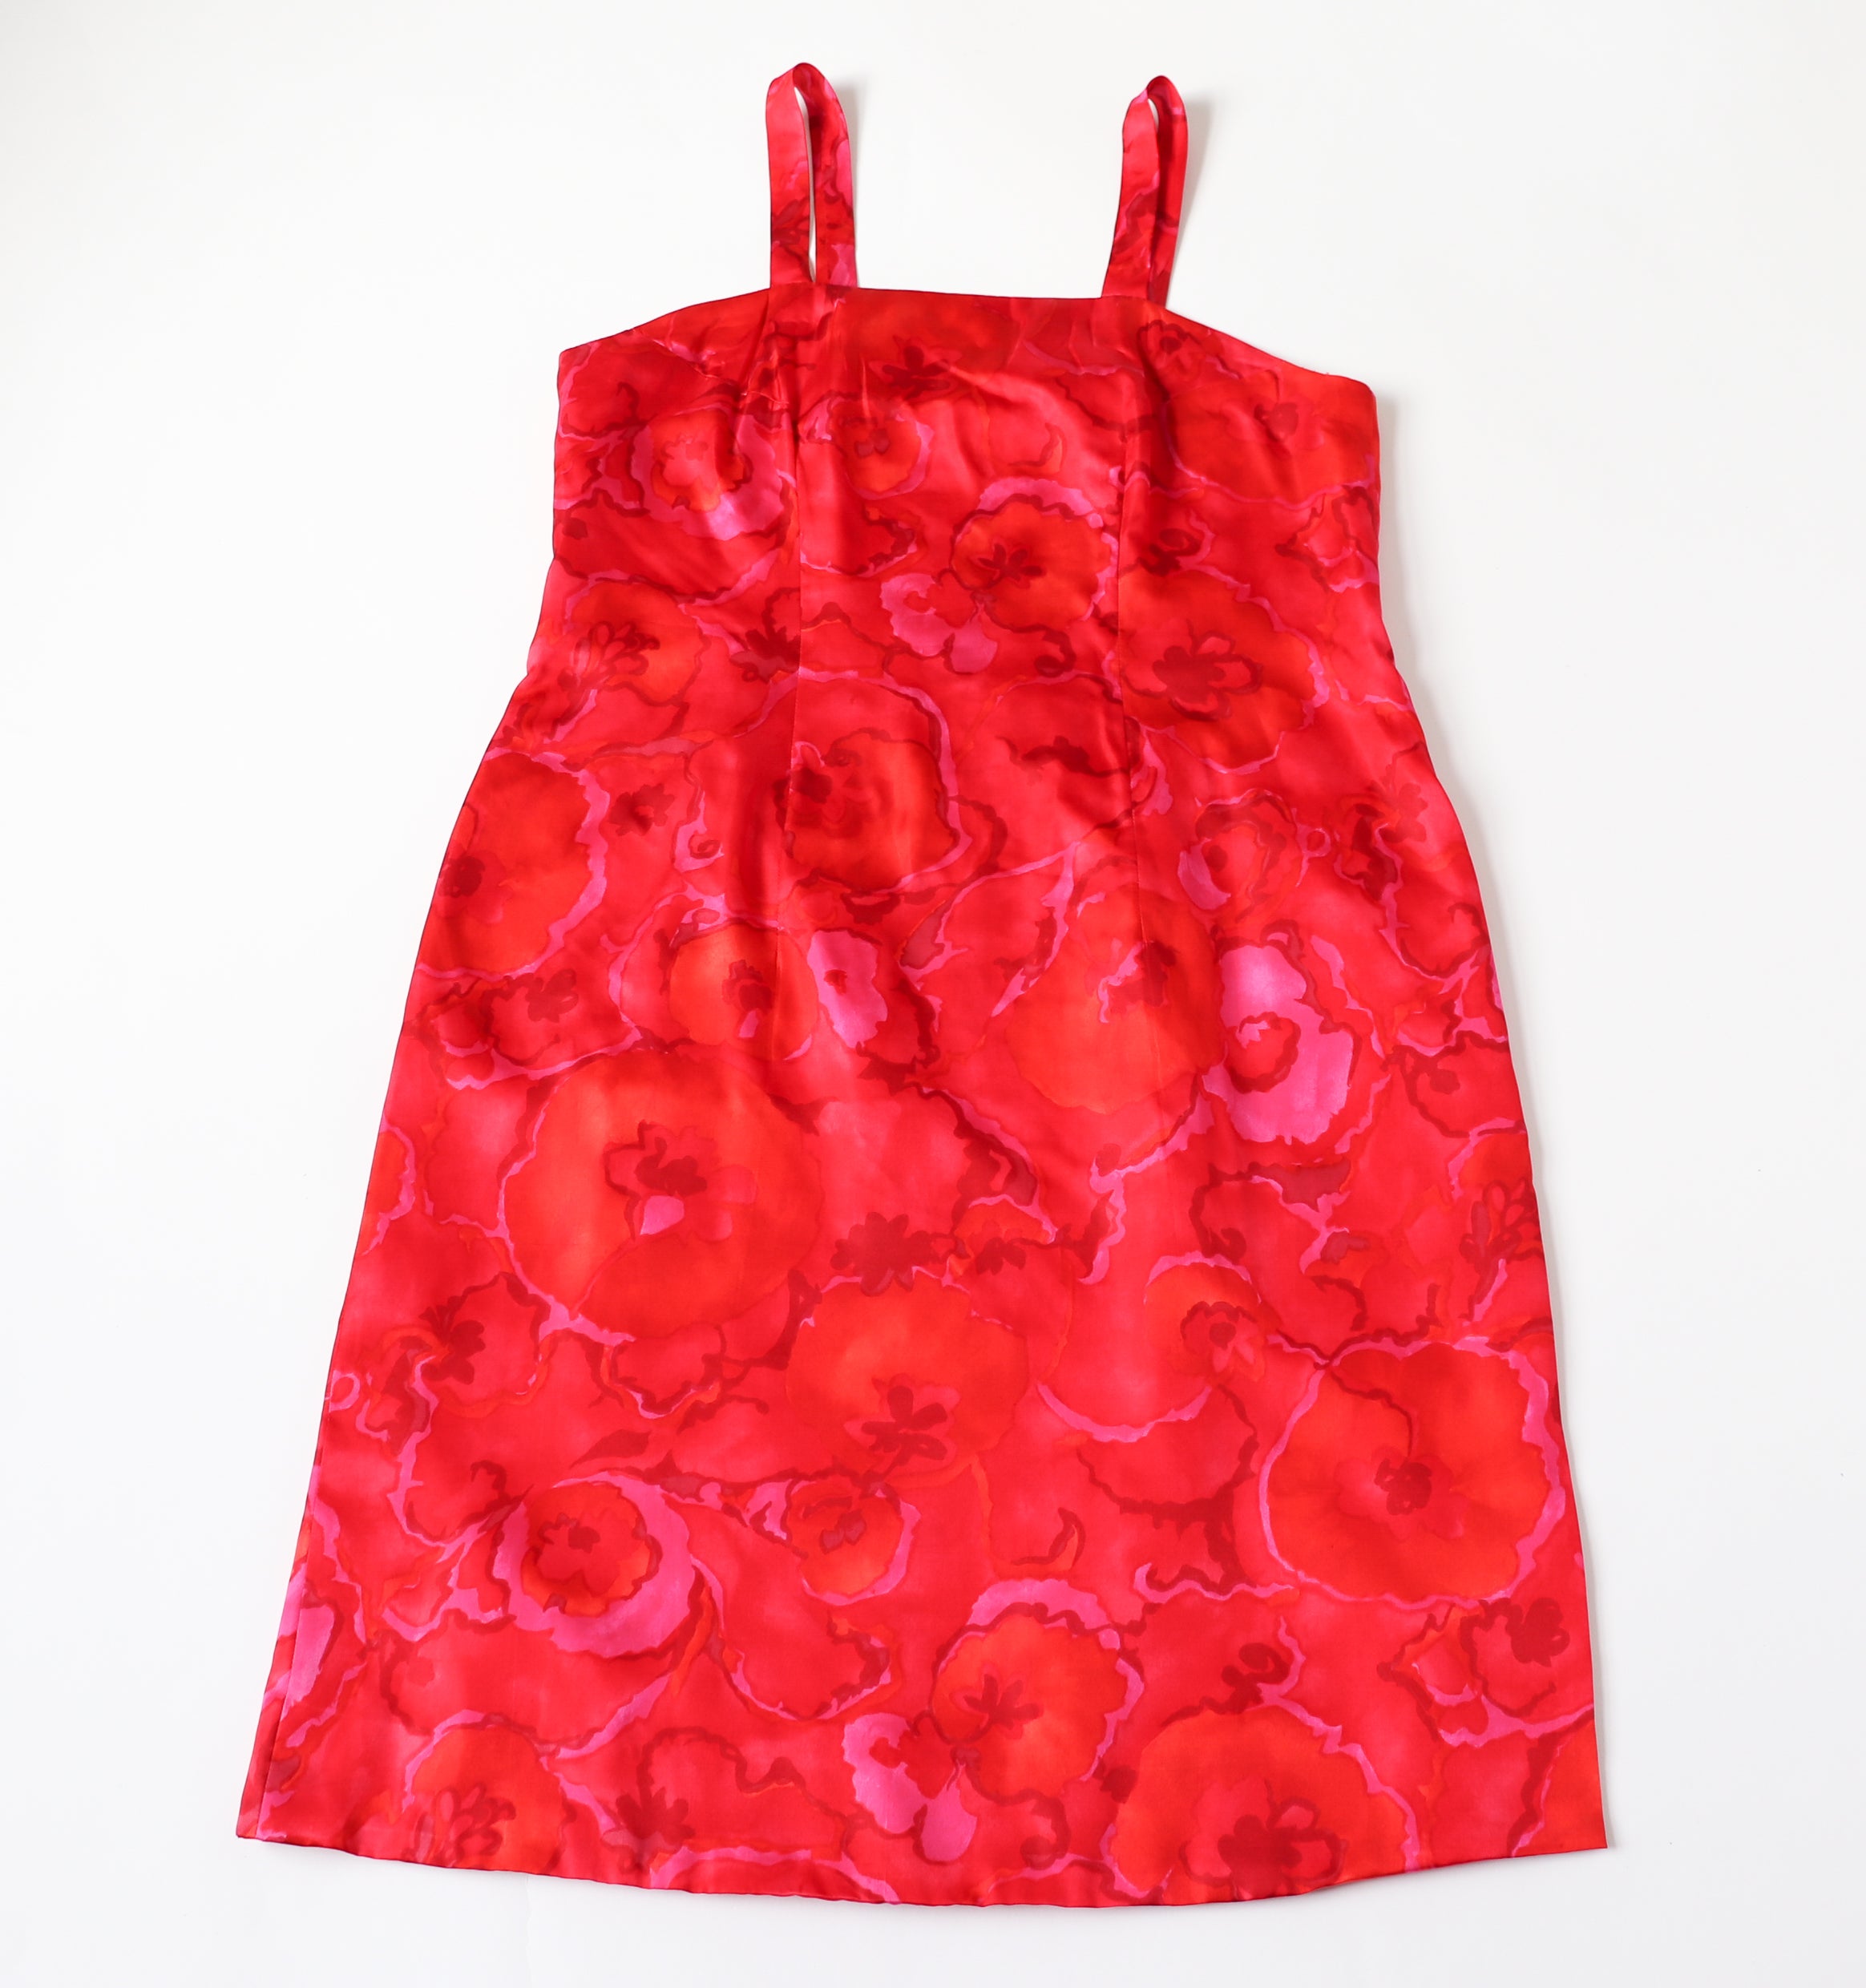 1960s Hand Made Cocktail Dress - Red Floral - Acetate - Strappy - M / L - UK 12 / 14